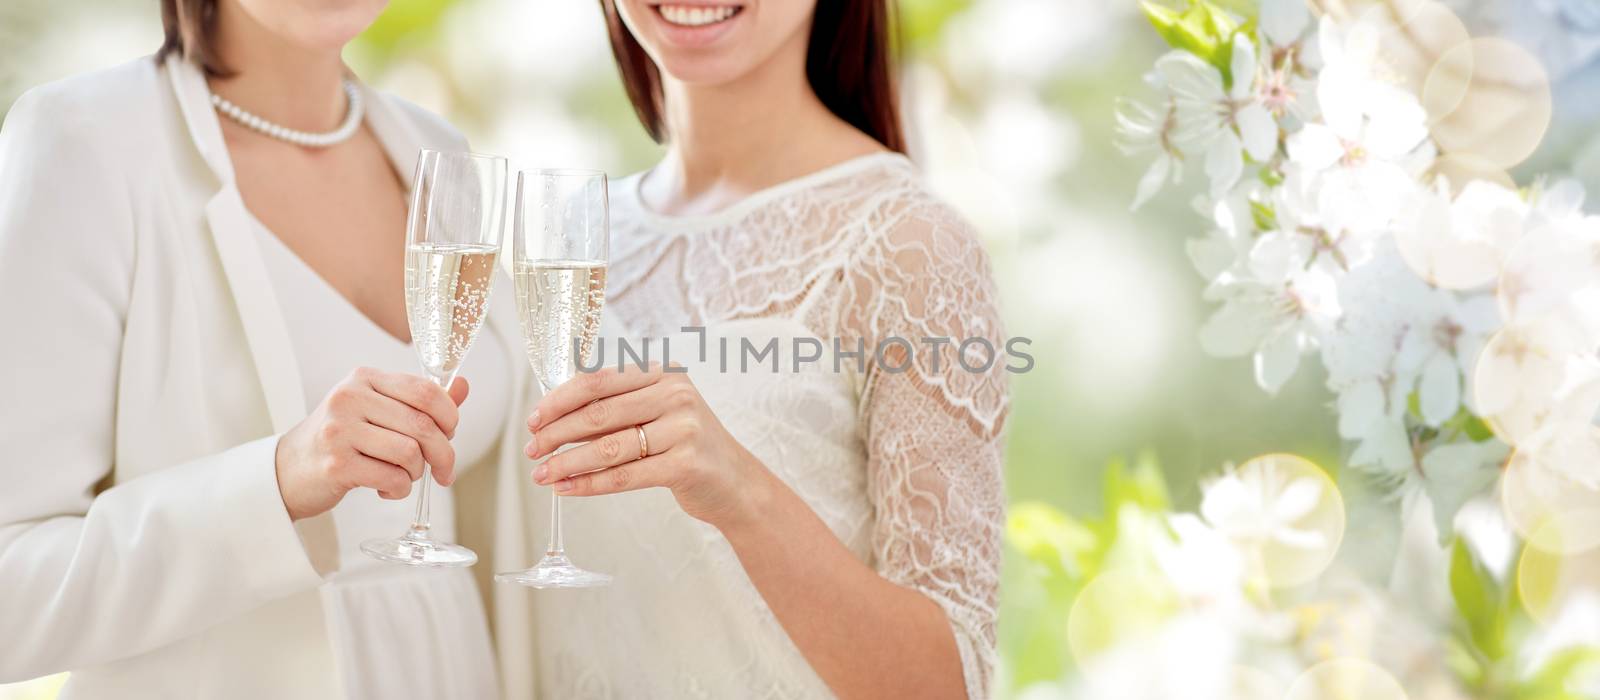 people, homosexuality, same-sex marriage, celebration and love concept - close up of happy married lesbian couple holding and clinking champagne glasses over green background